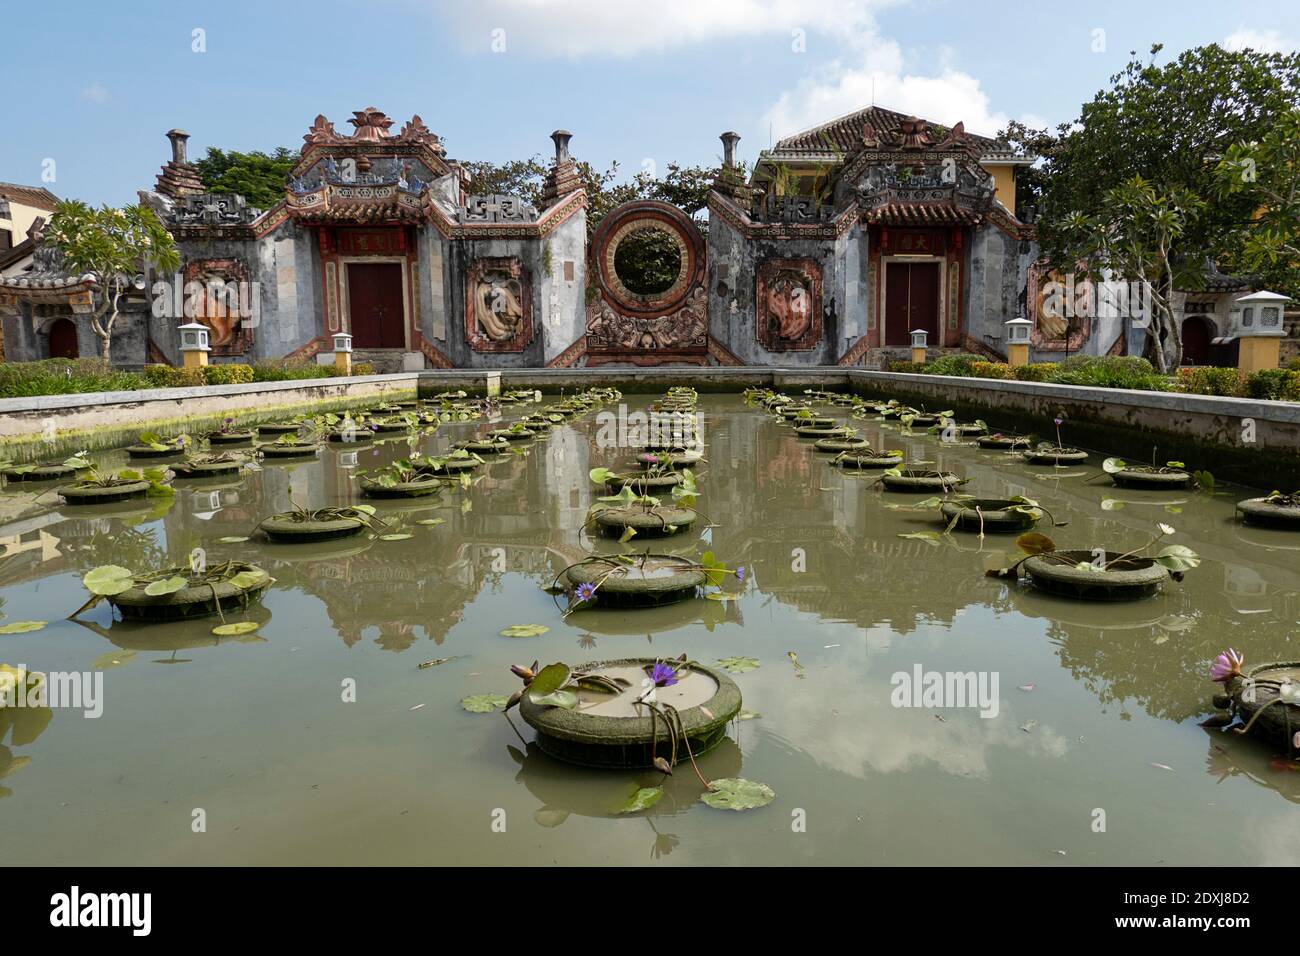 Water lilies in a pond at A Buddhist temple Stock Photo